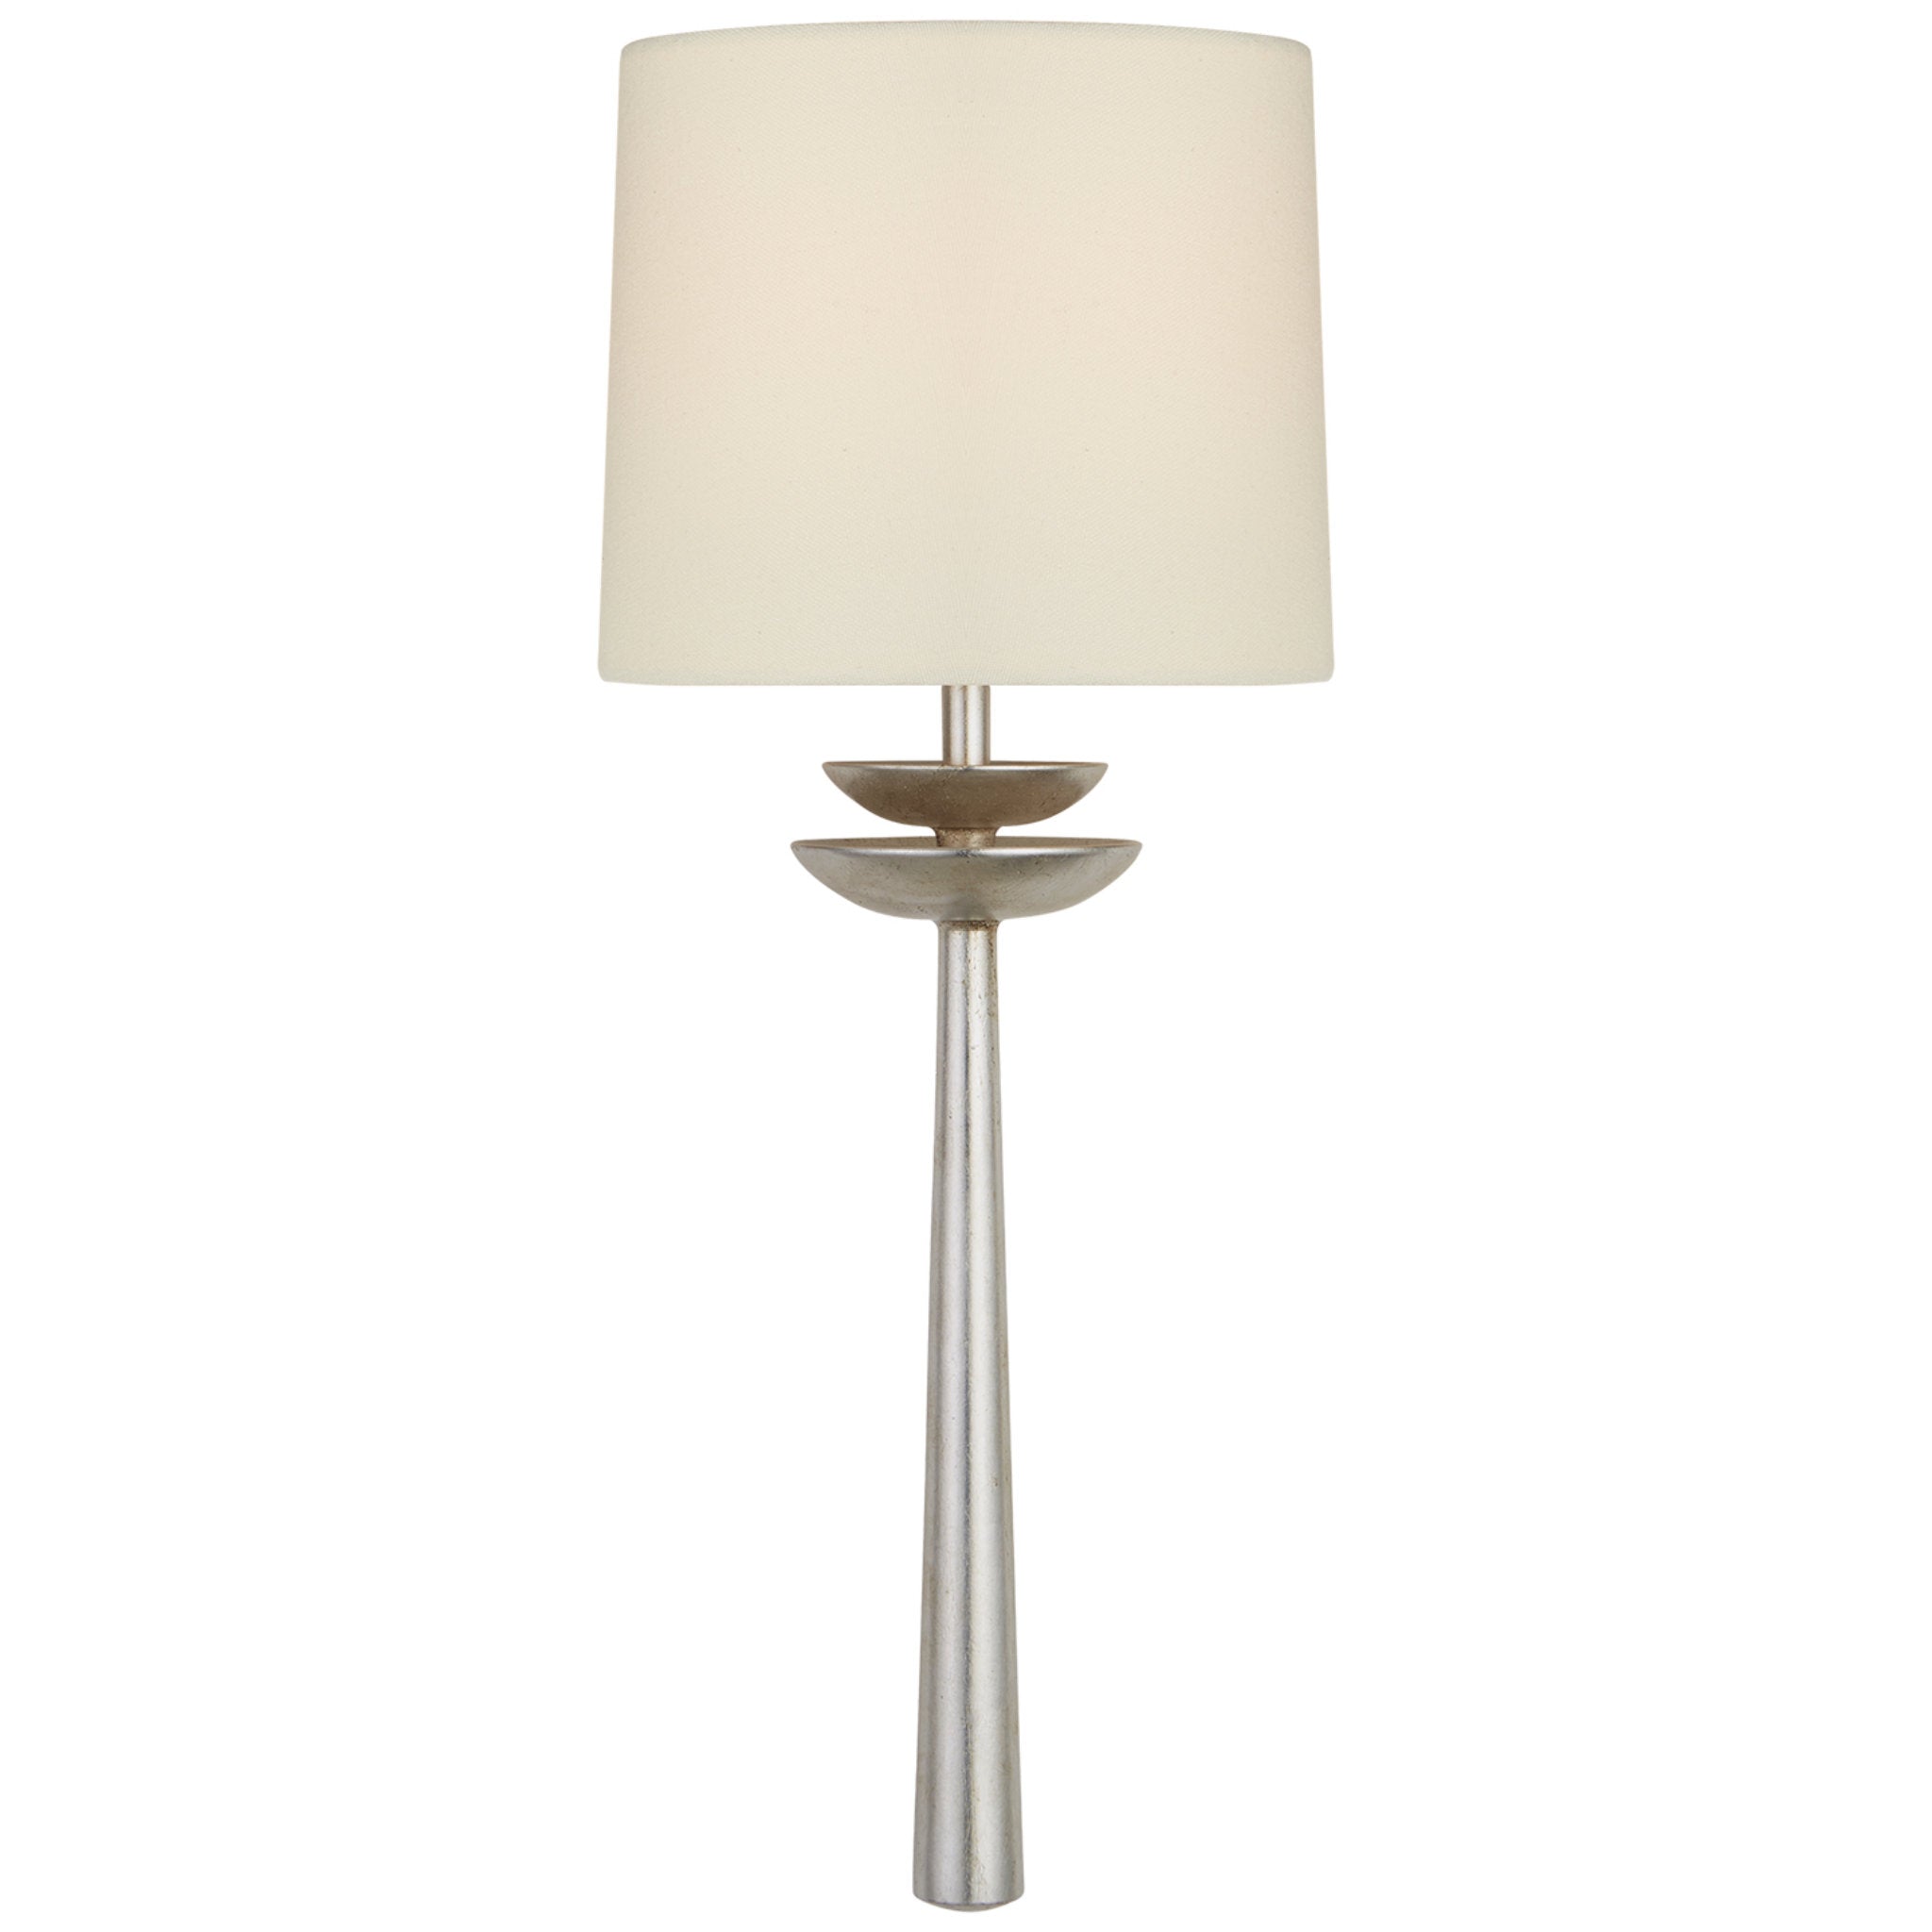 AERIN Beaumont Medium Tail Sconce in Burnished Silver Leaf with Linen Shade